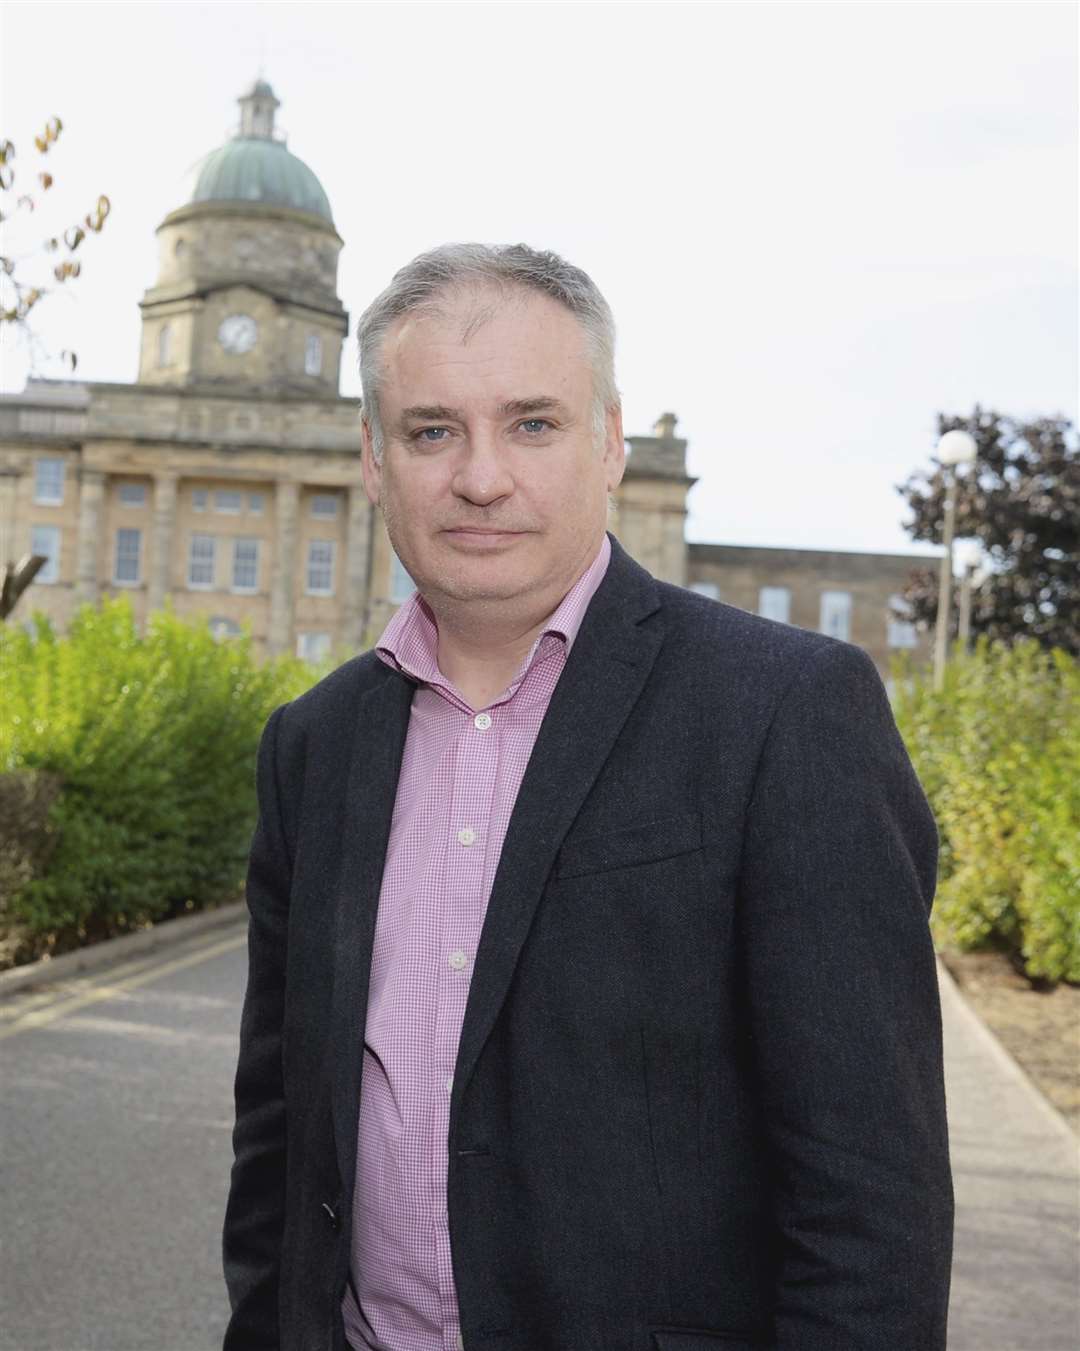 Moray MSP Richard Lochhead welcomed the "positive" meeting and agreed with his political rival regarding timescales. Picture: Daniel Forsyth.